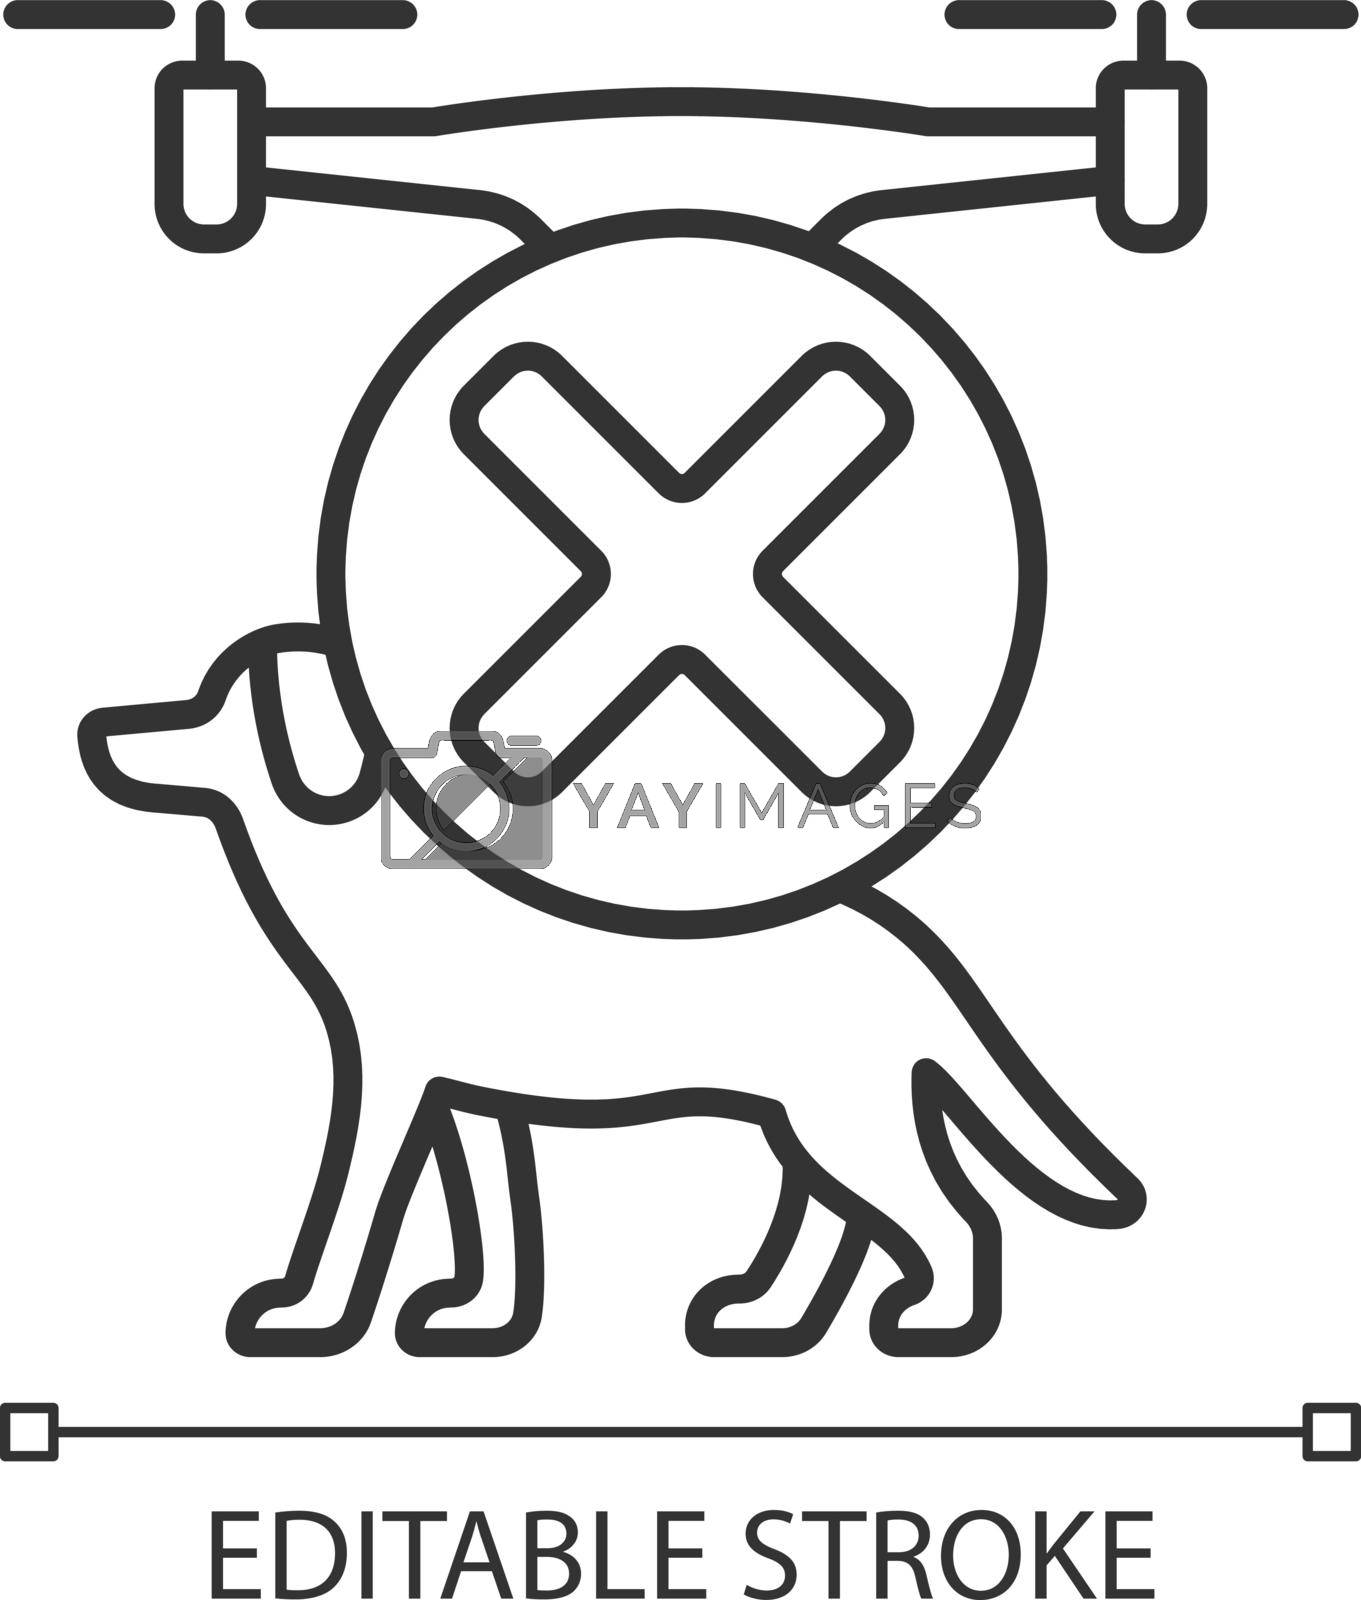 Dont fly above animals linear manual label icon. No pet disturbance. Thin line customizable illustration. Contour symbol. Vector isolated outline drawing for product use instructions. Editable stroke